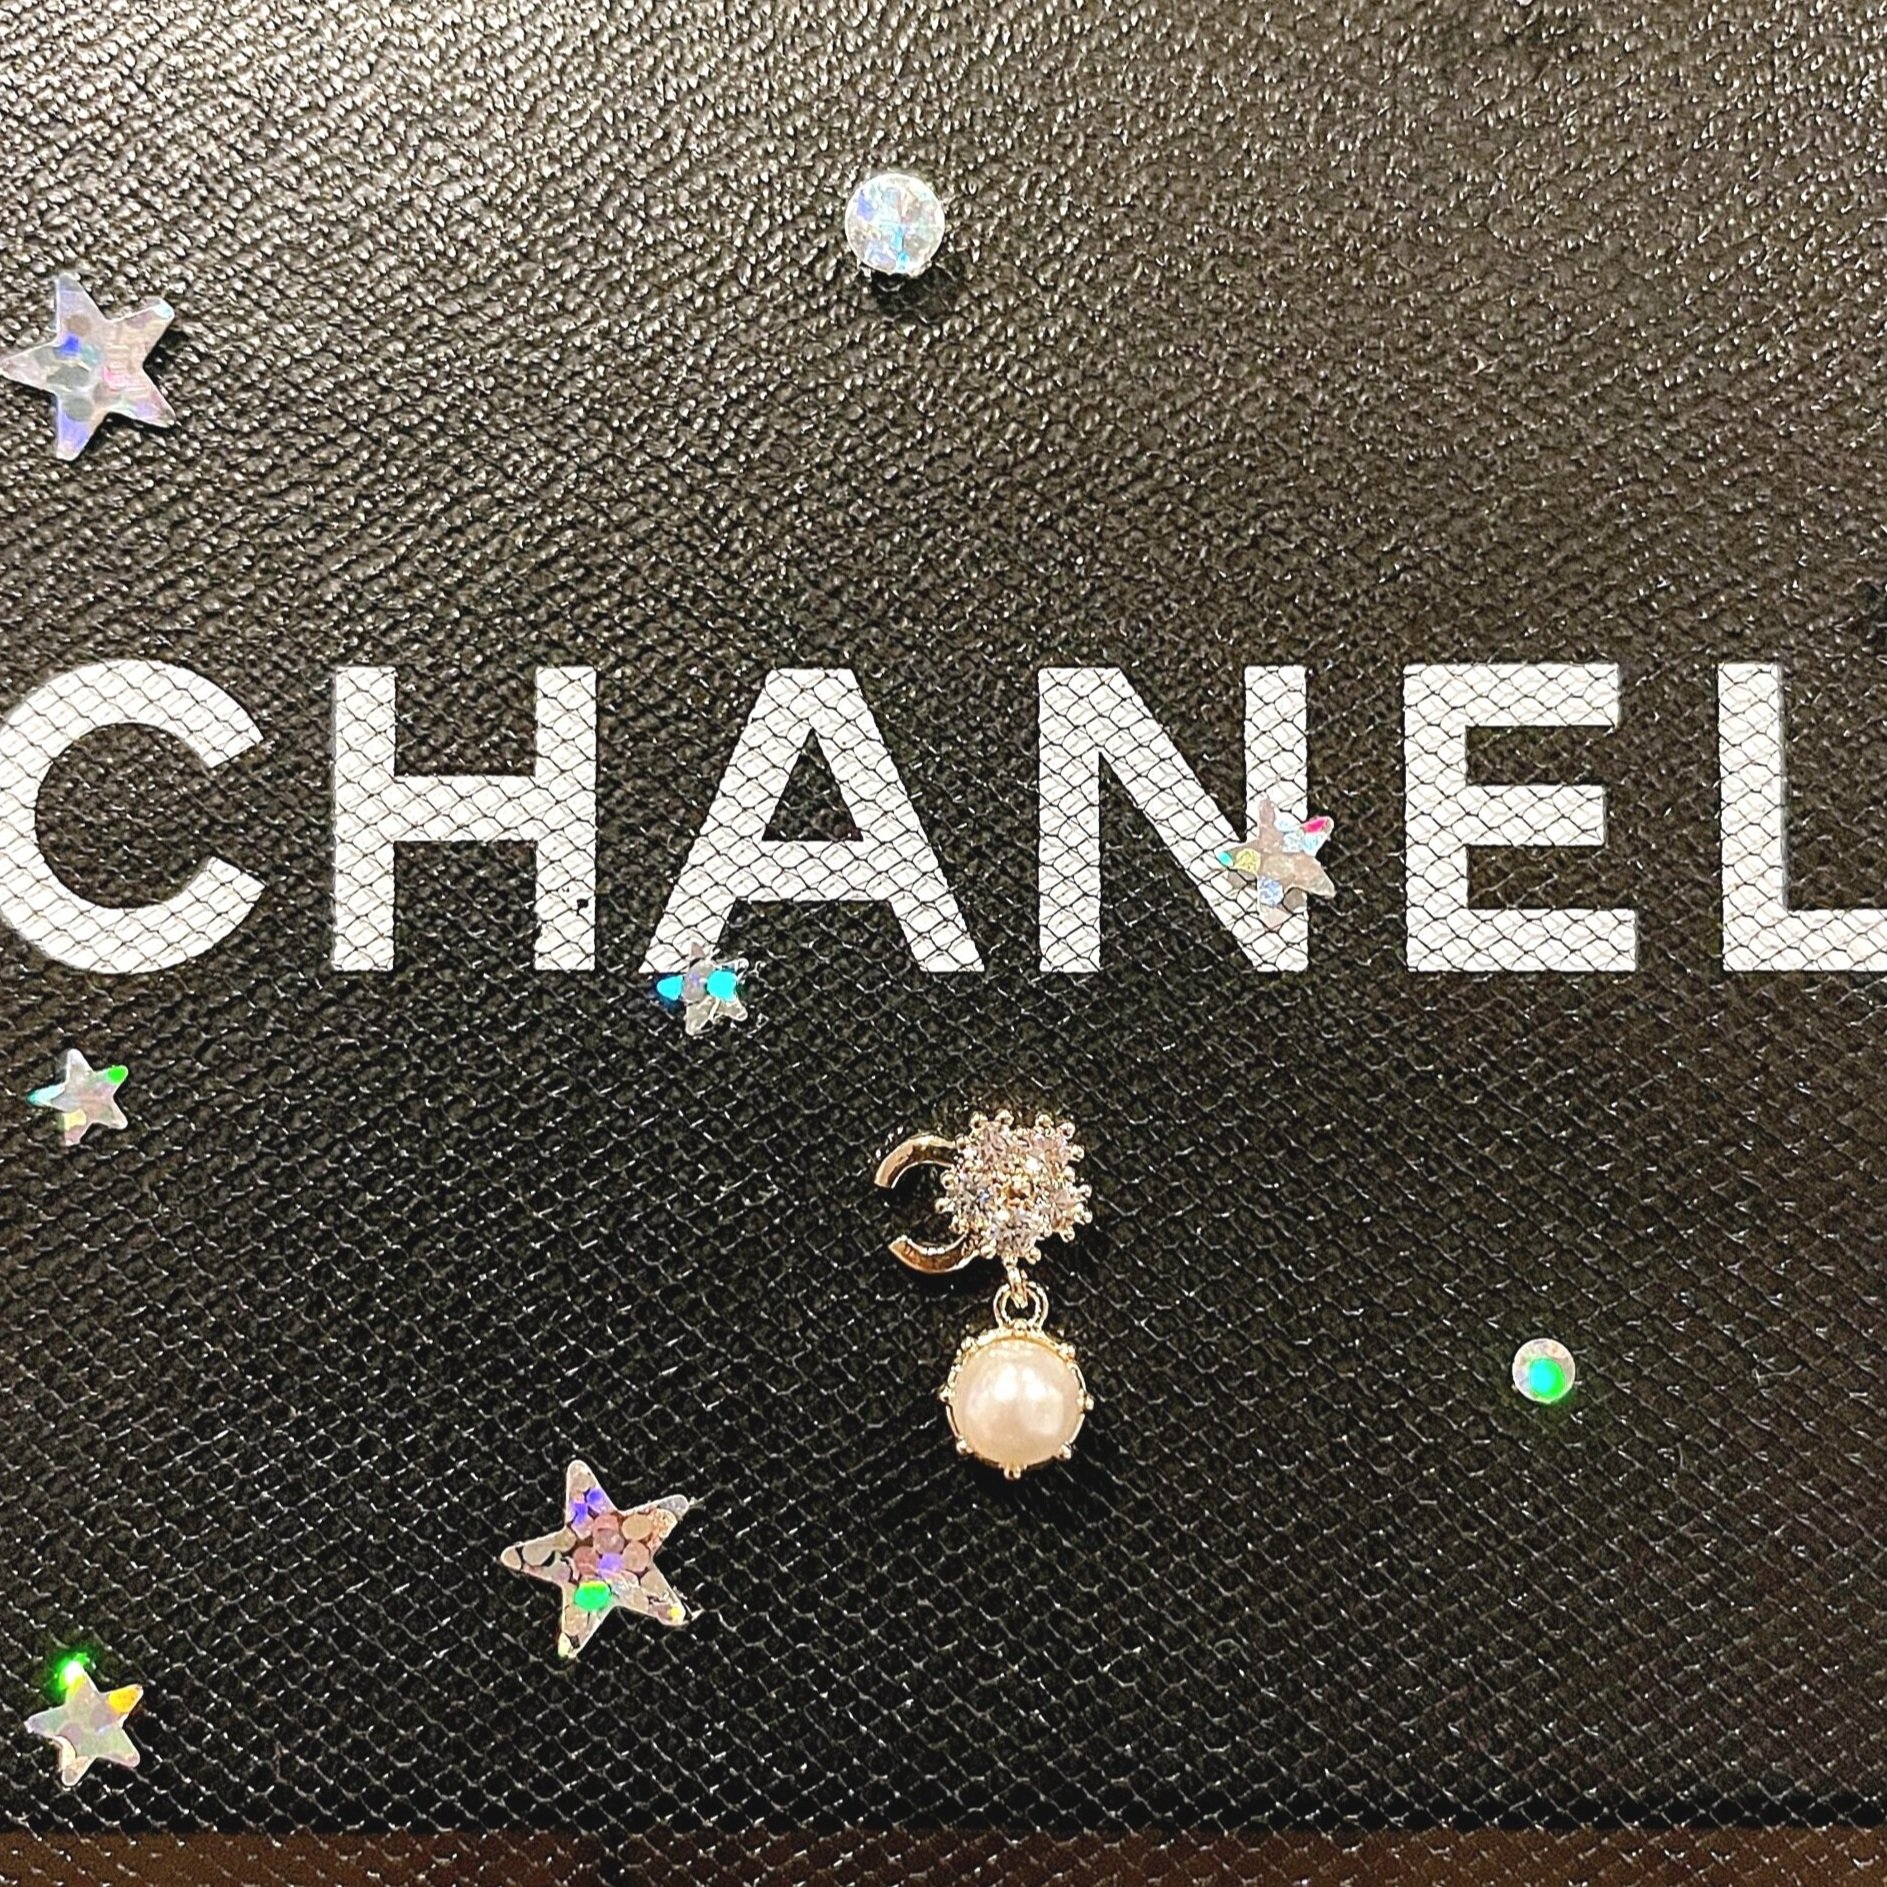 chanel logo charms for nails